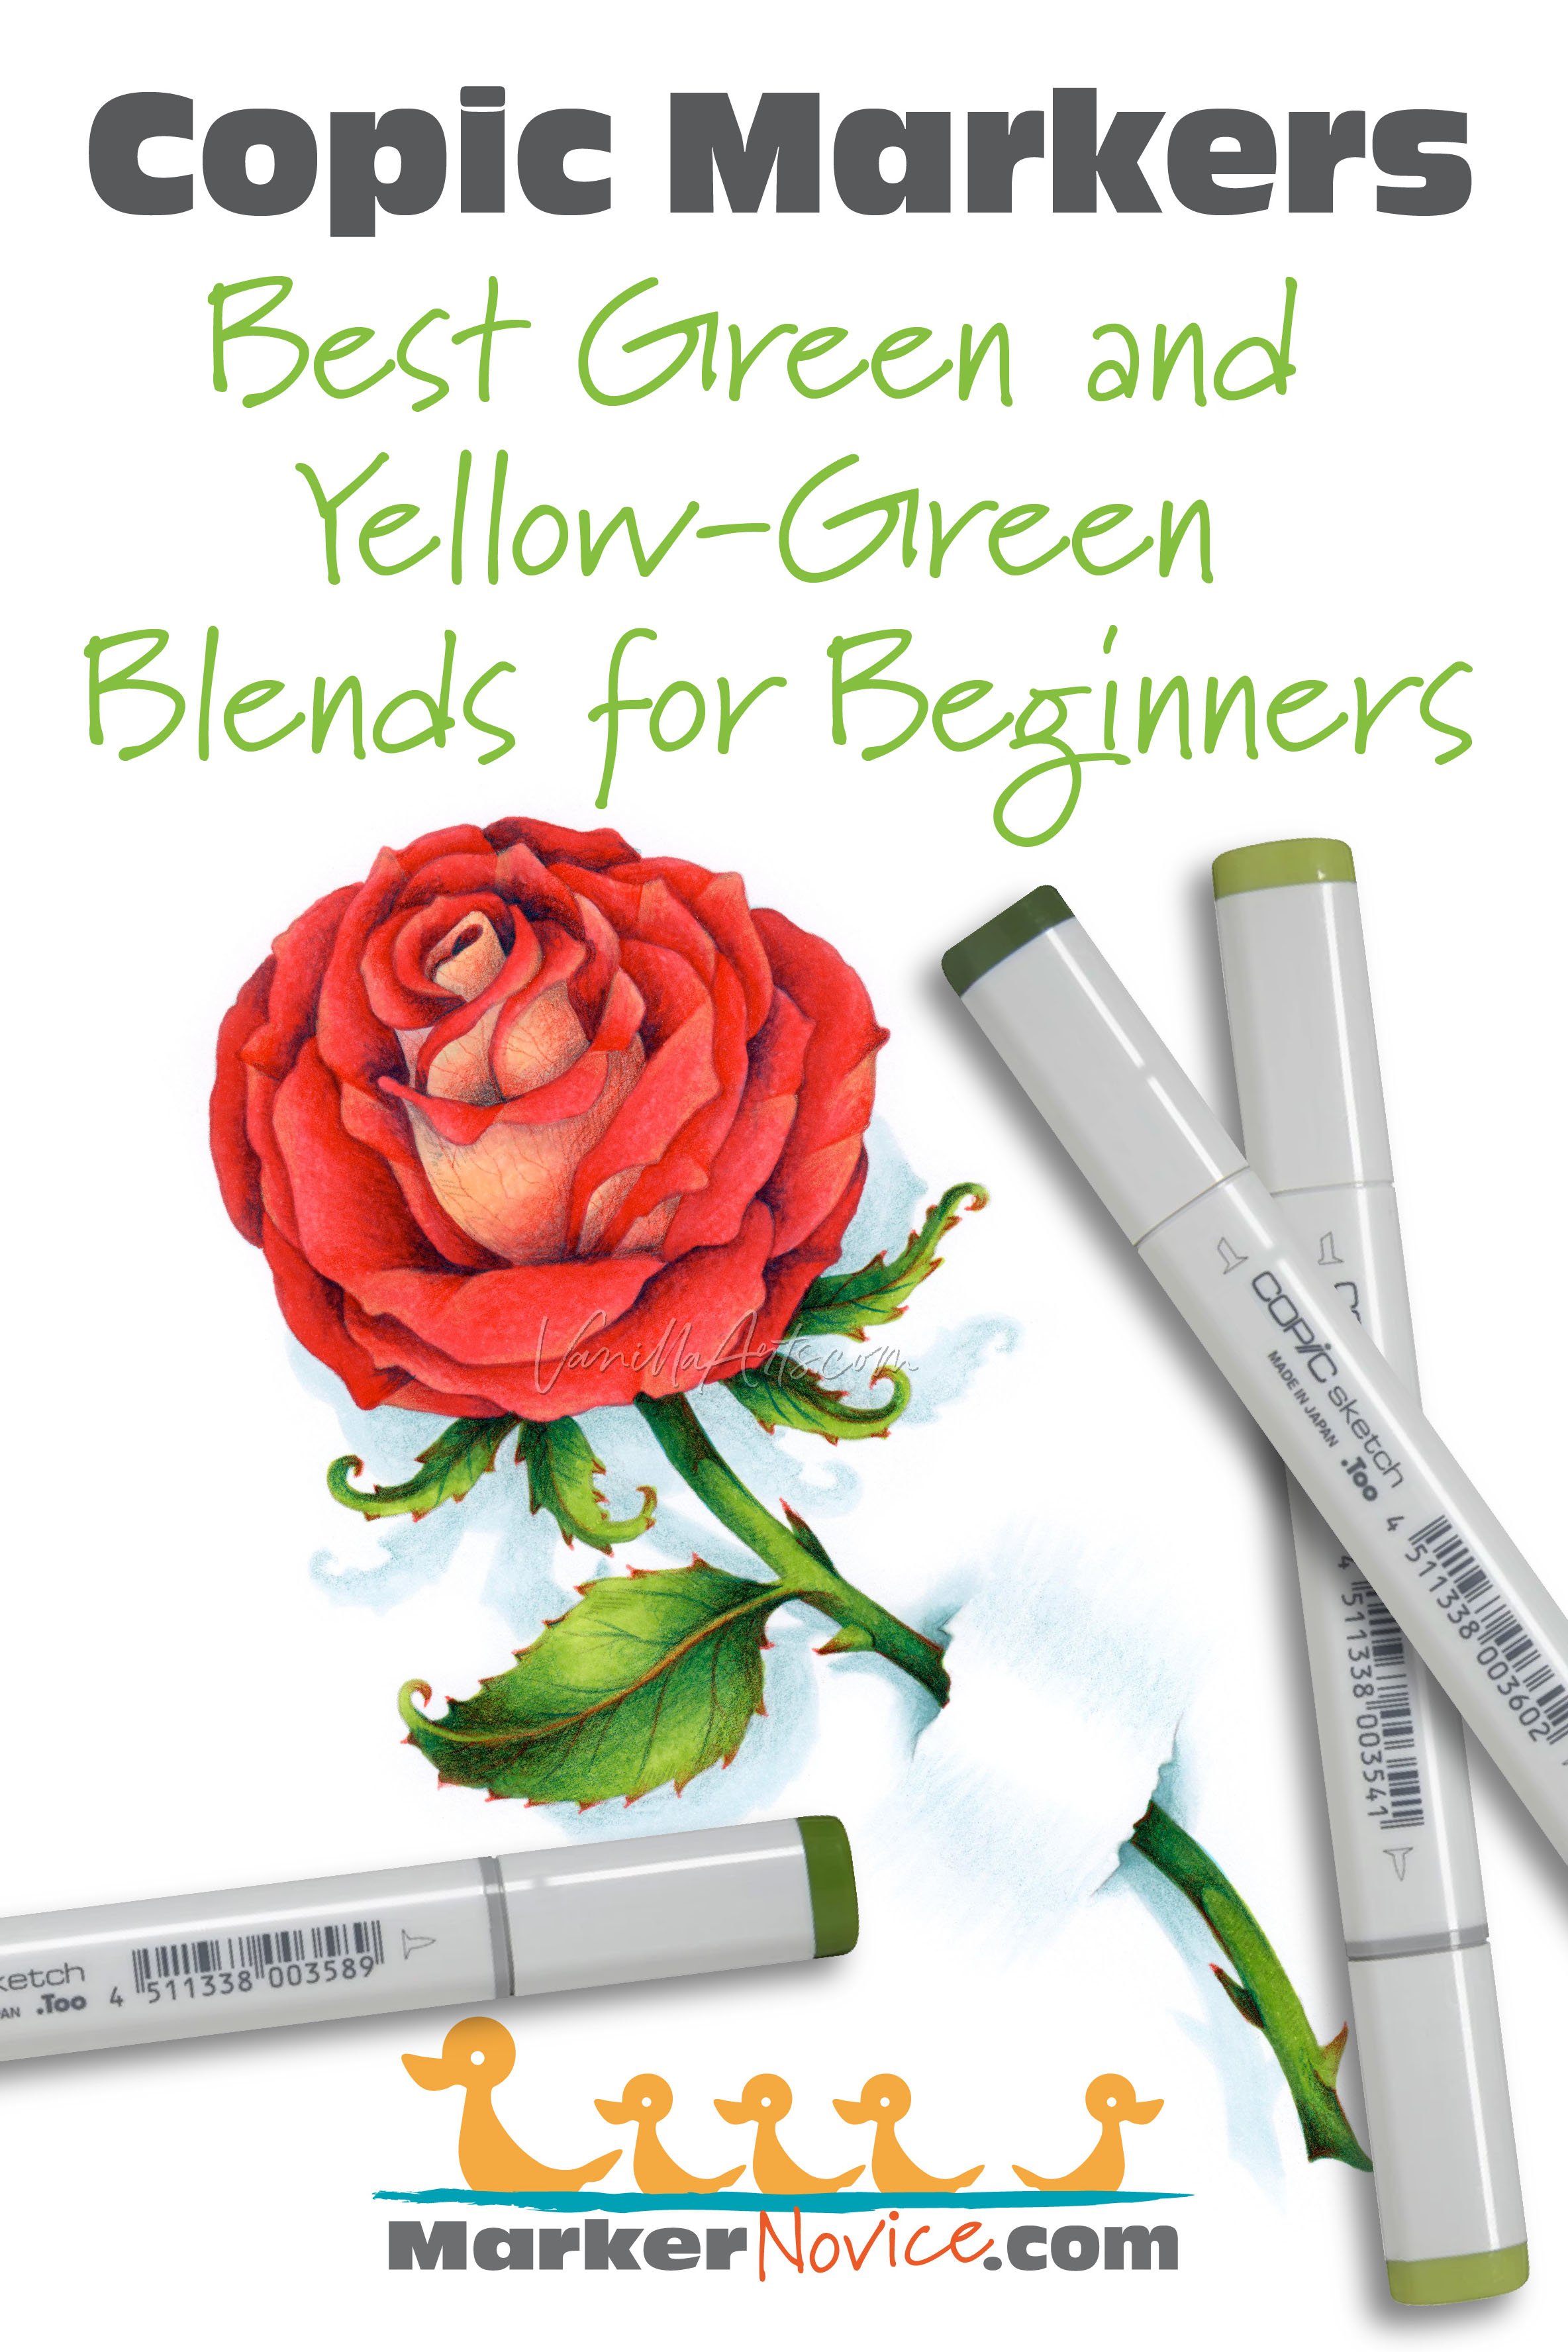 How to Blend Alcohol Markers for Beginners! 